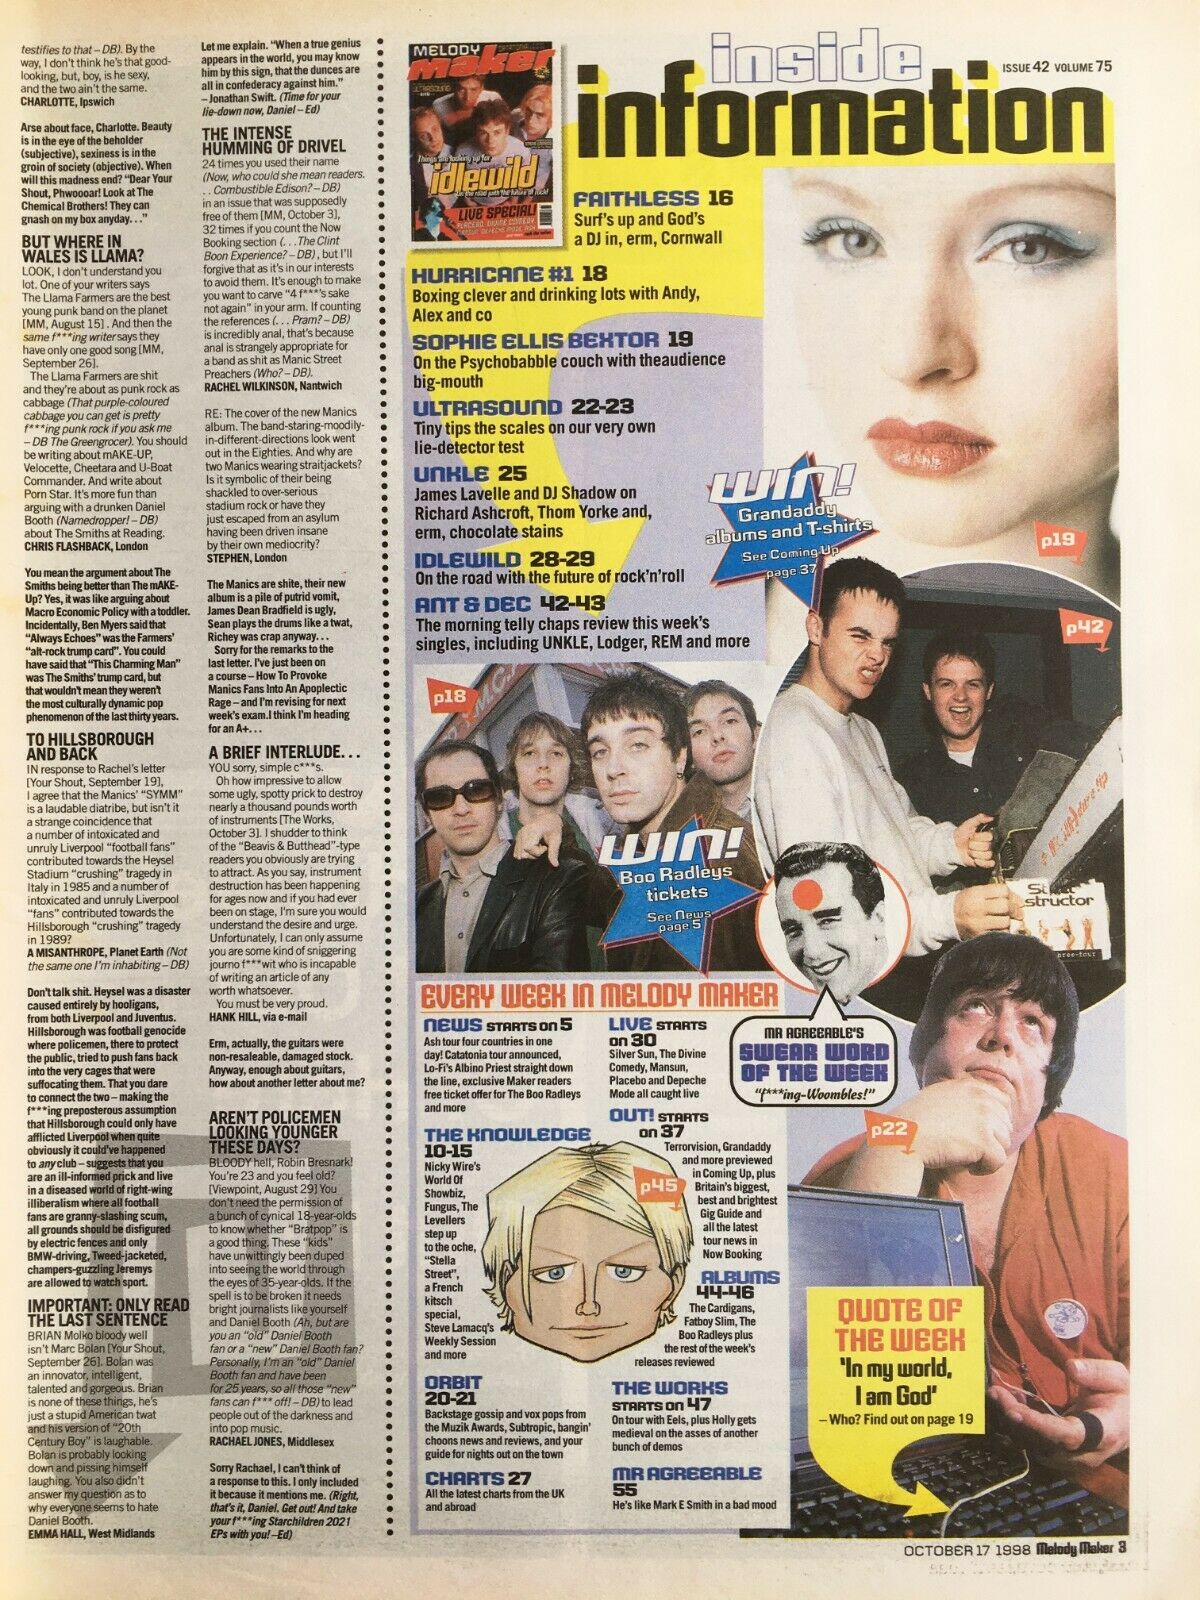 File:MELODY MAKER 17 October 1998 contents.jpg